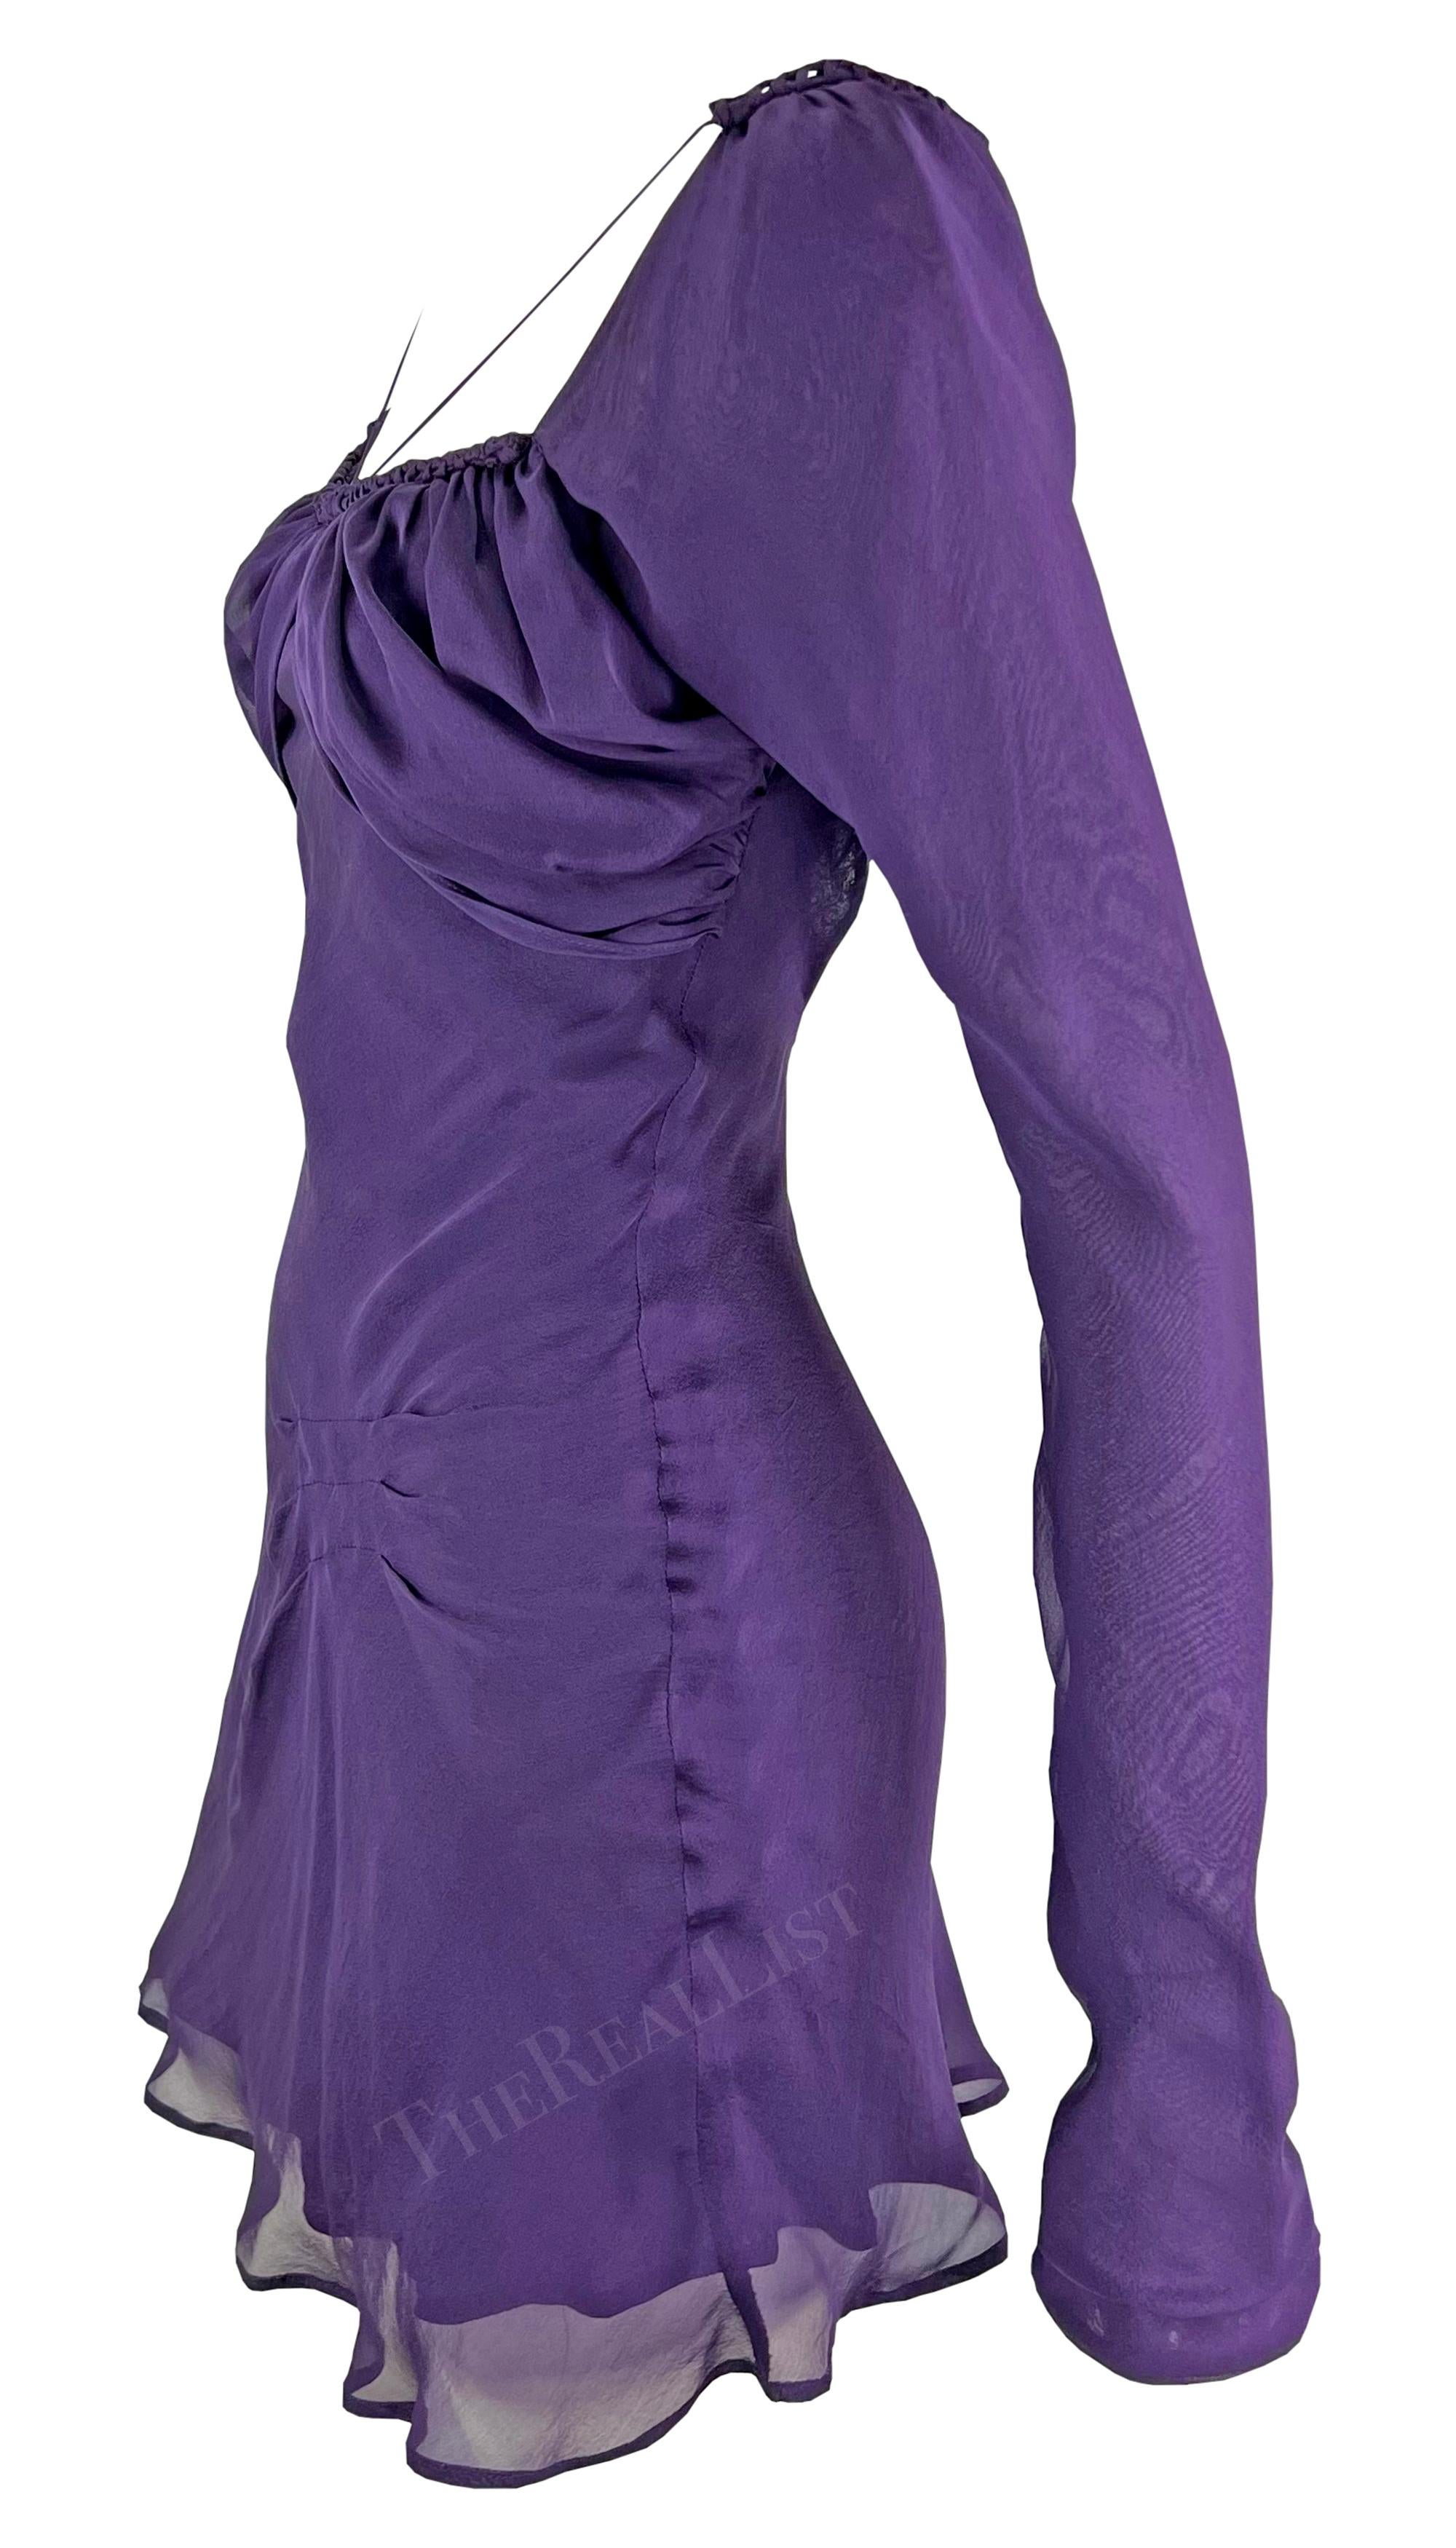 S/S 2003 Gucci by Tom Ford Deep Purple Long Sleeve Silk Chiffon Mini Dress In Good Condition For Sale In West Hollywood, CA